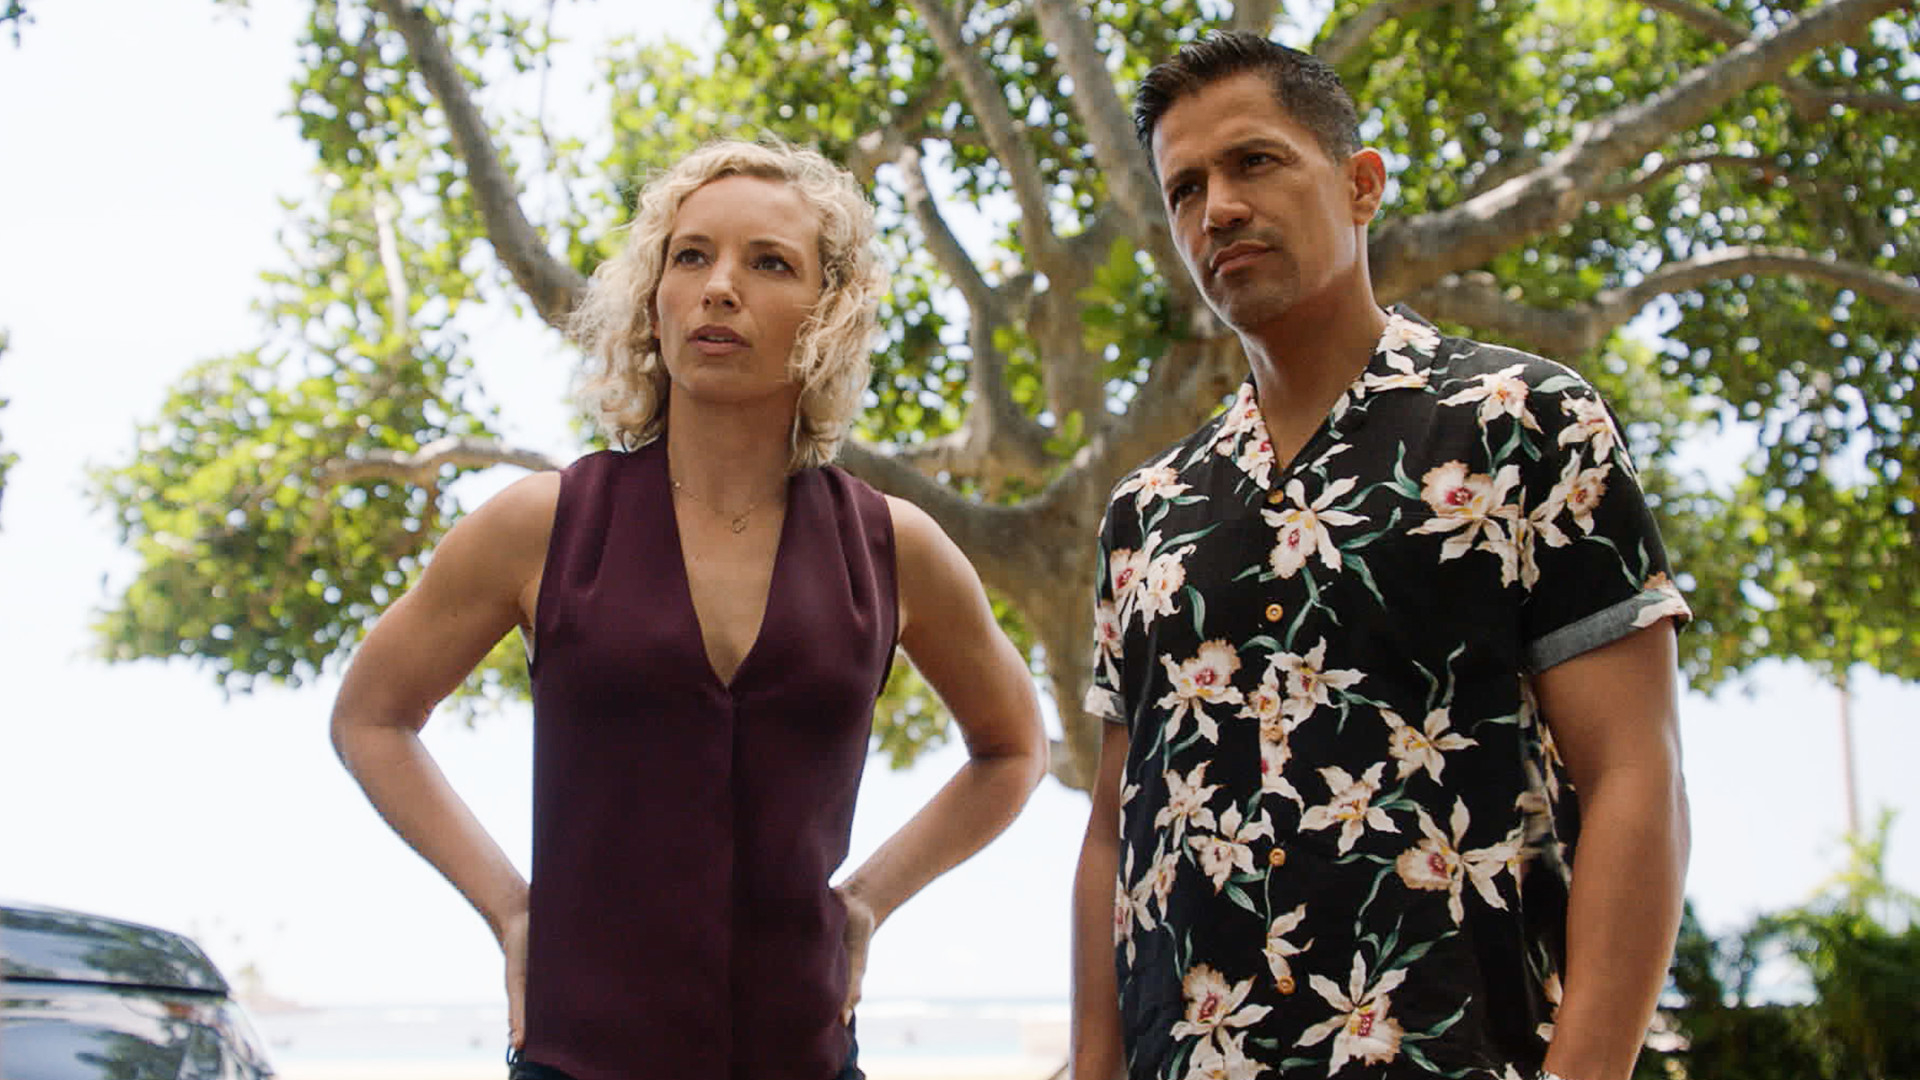 Perdita Weeks as Higgins, with her hands on her hips, standing next to Jay Hernandez an Magnum in the 'Magnum P.I.' Season 4 finale